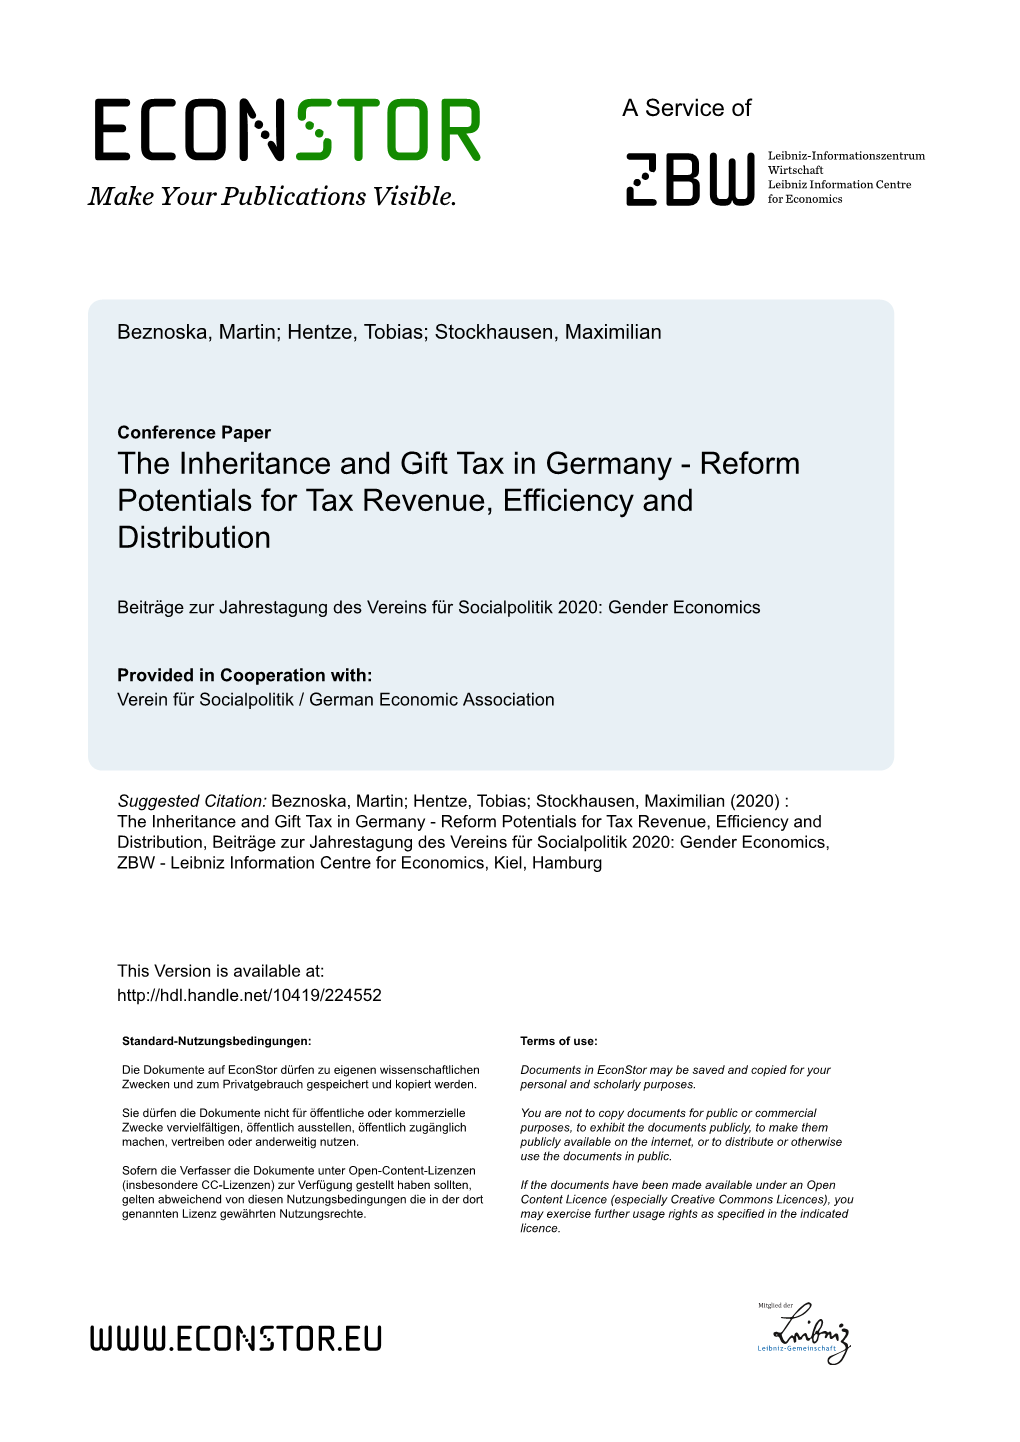 The Inheritance and Gift Tax in Germany - Reform Potentials for Tax Revenue, Efficiency and Distribution